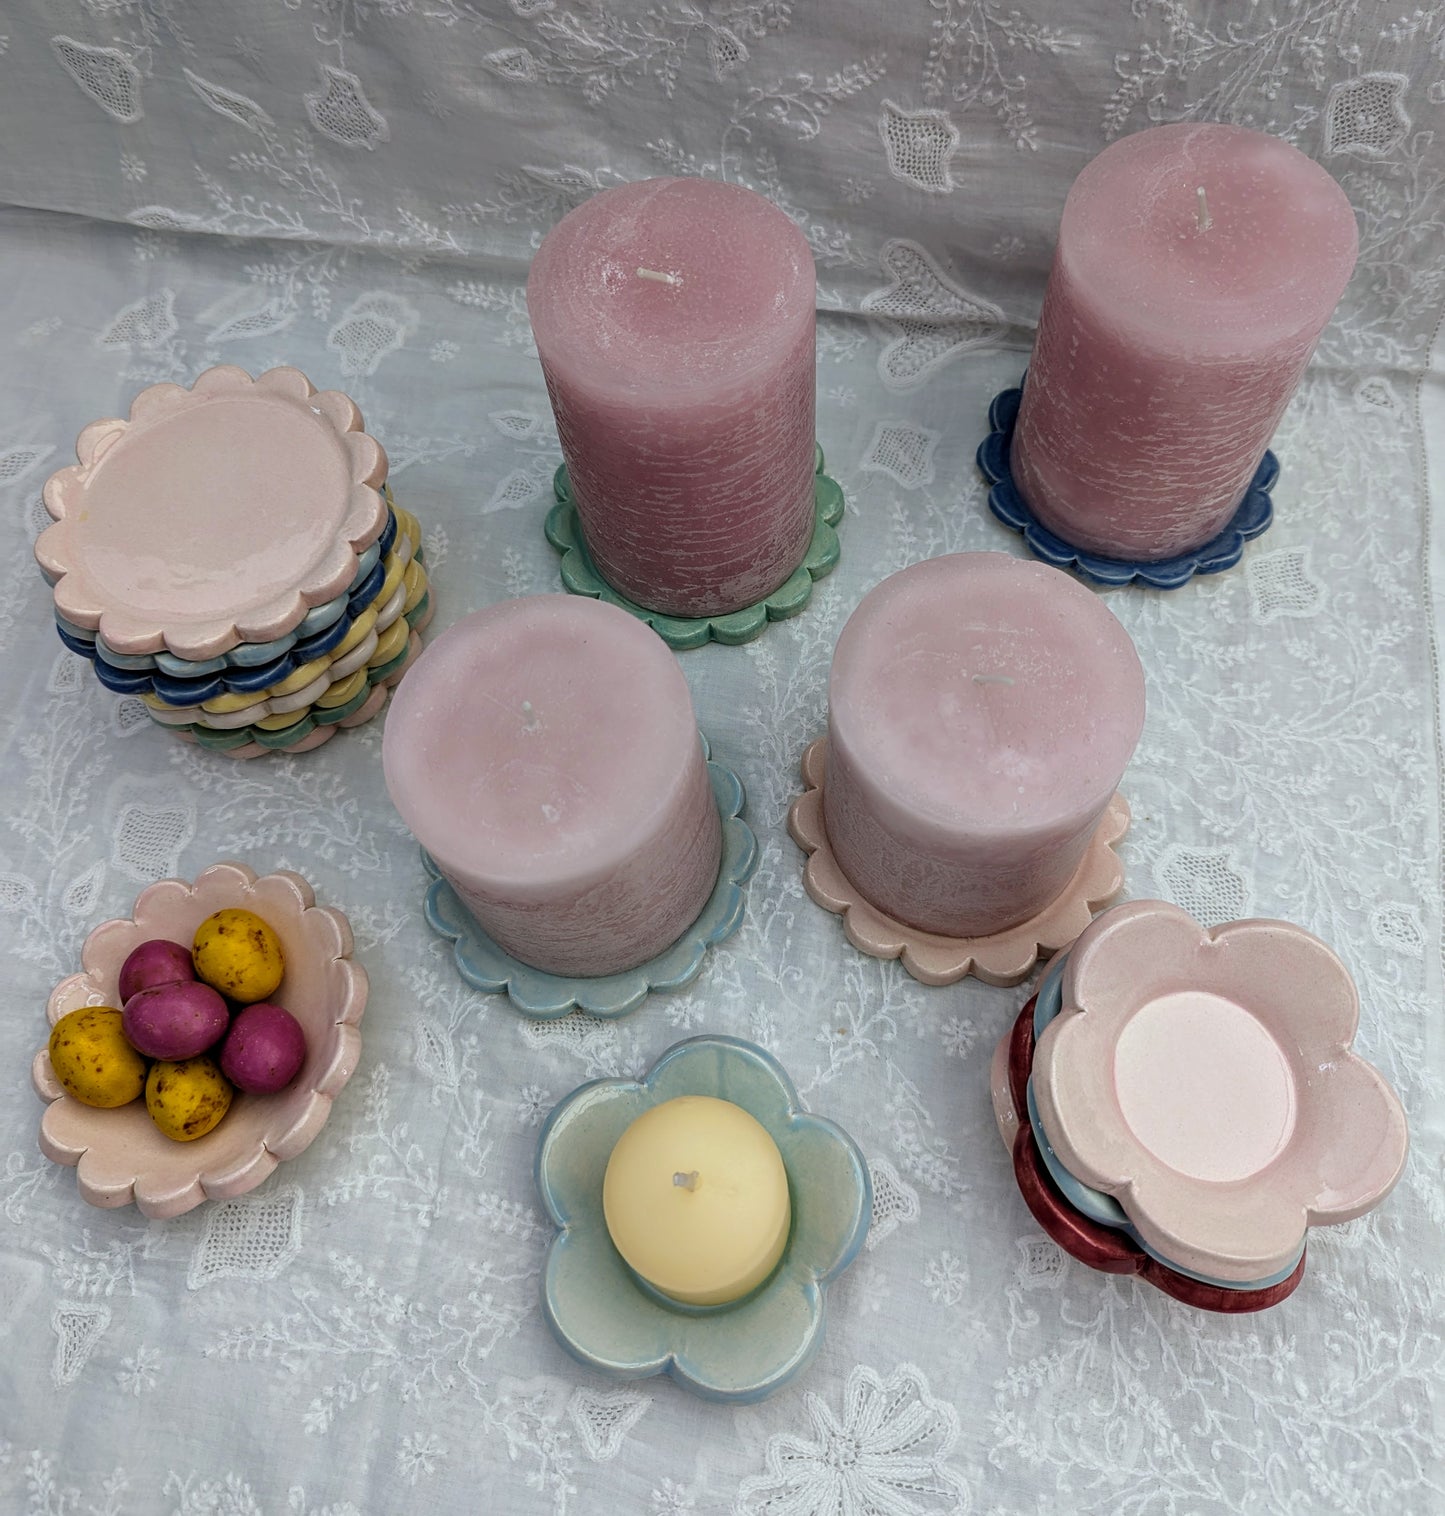 Sea Bramble Ceramics - Handmade little Flower dishes that are perfect for butter, condiments, trinkets and tealights. Viewed from the top with Scalloped candle stand.